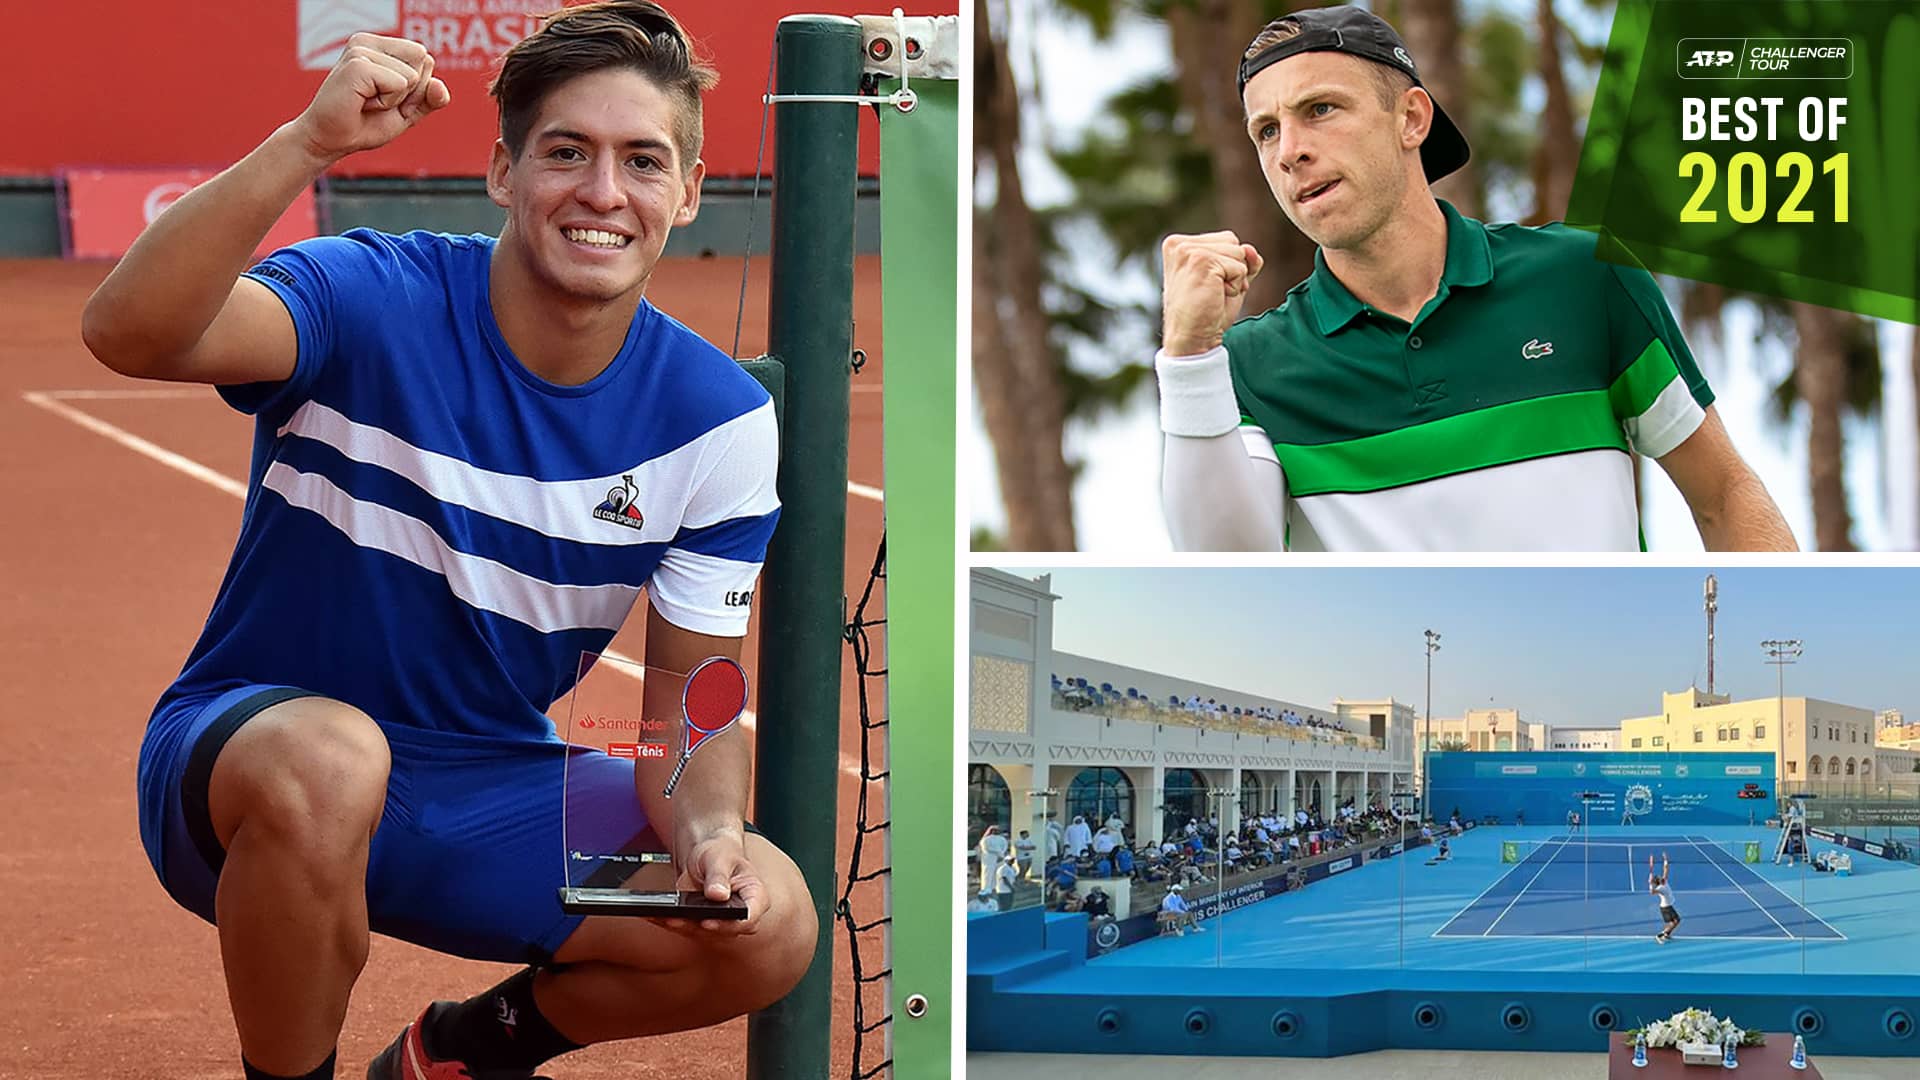 Sebastian Baez (left) and Tallon Griekspoor were two of the breakout stars on the ATP Challenger Tour in 2021, while Manama, Bahrain made a dazzling debut.